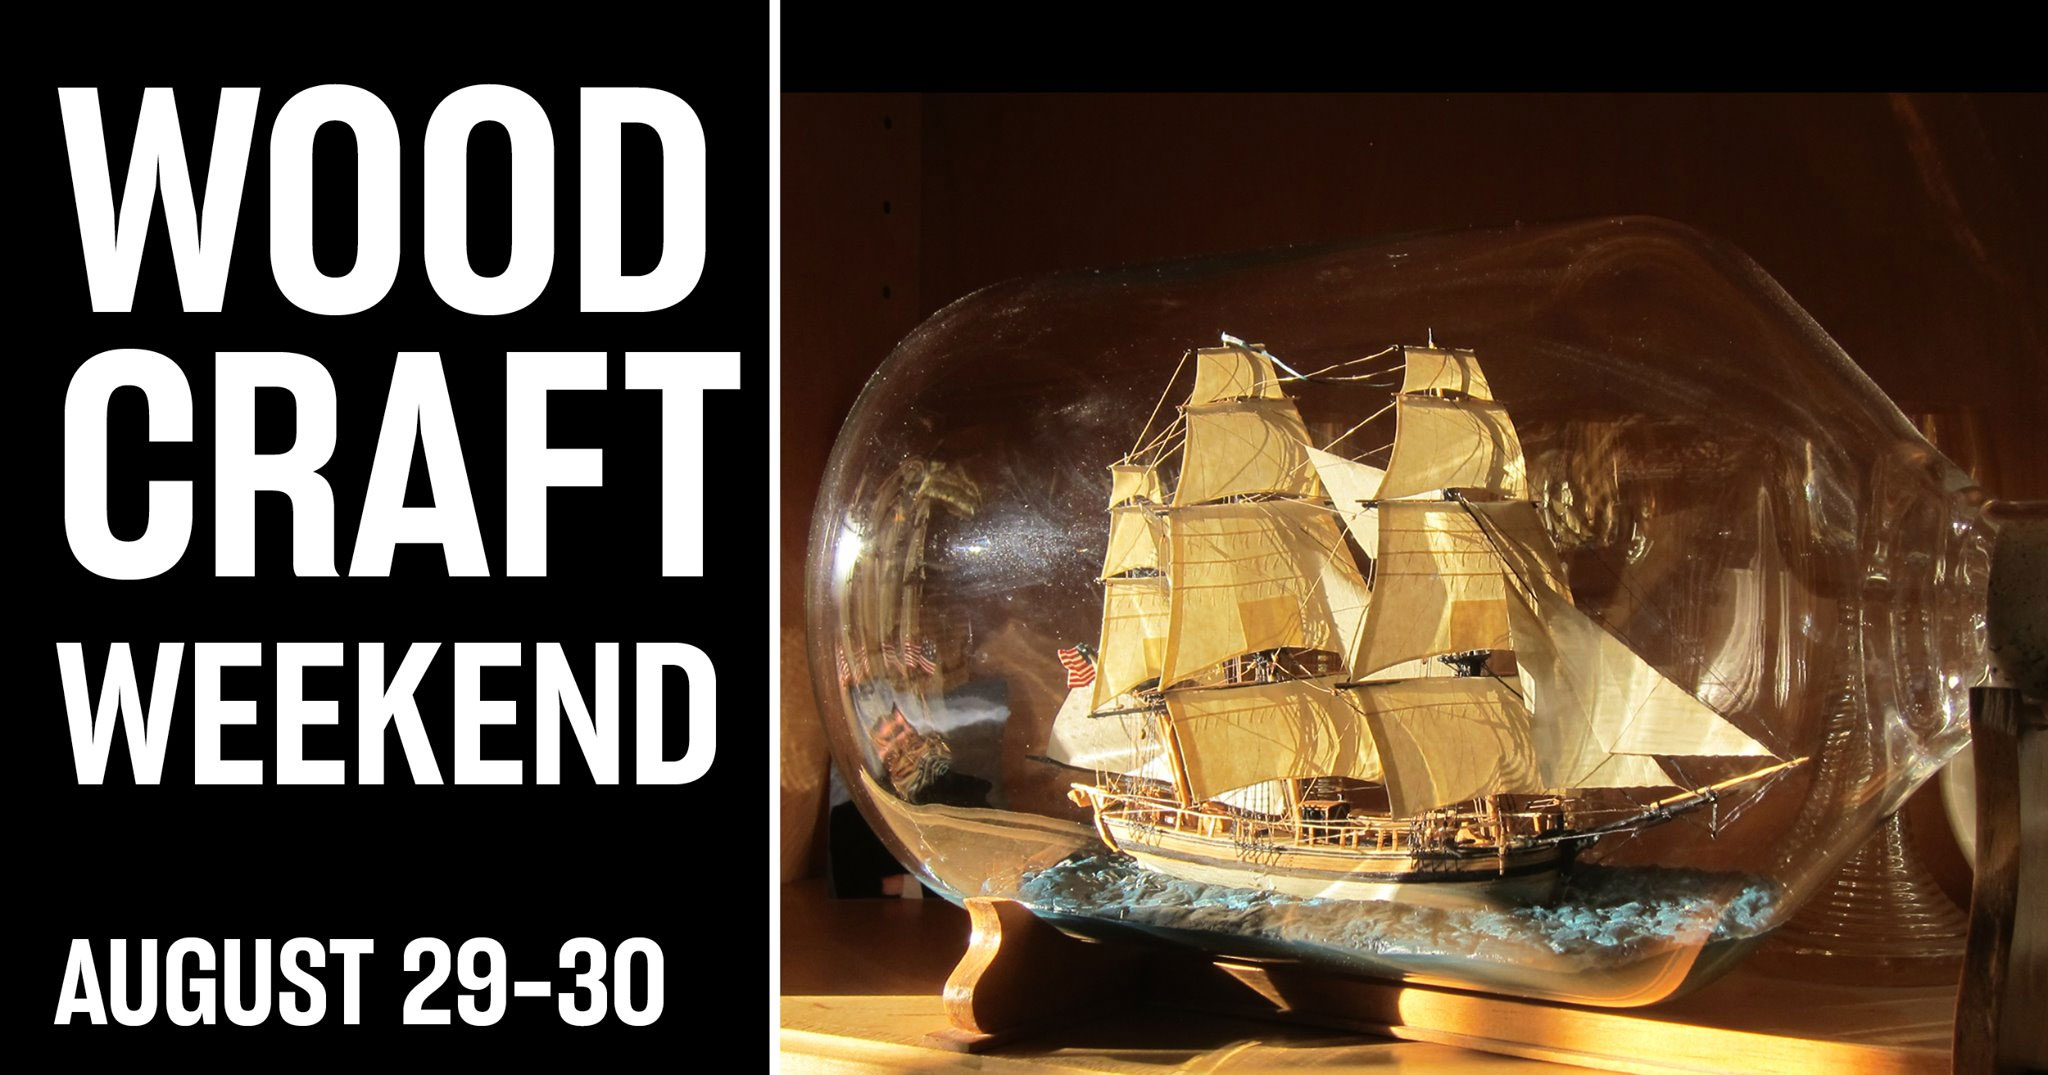 Woodcraft Weekend at Mystic Seaport Museum